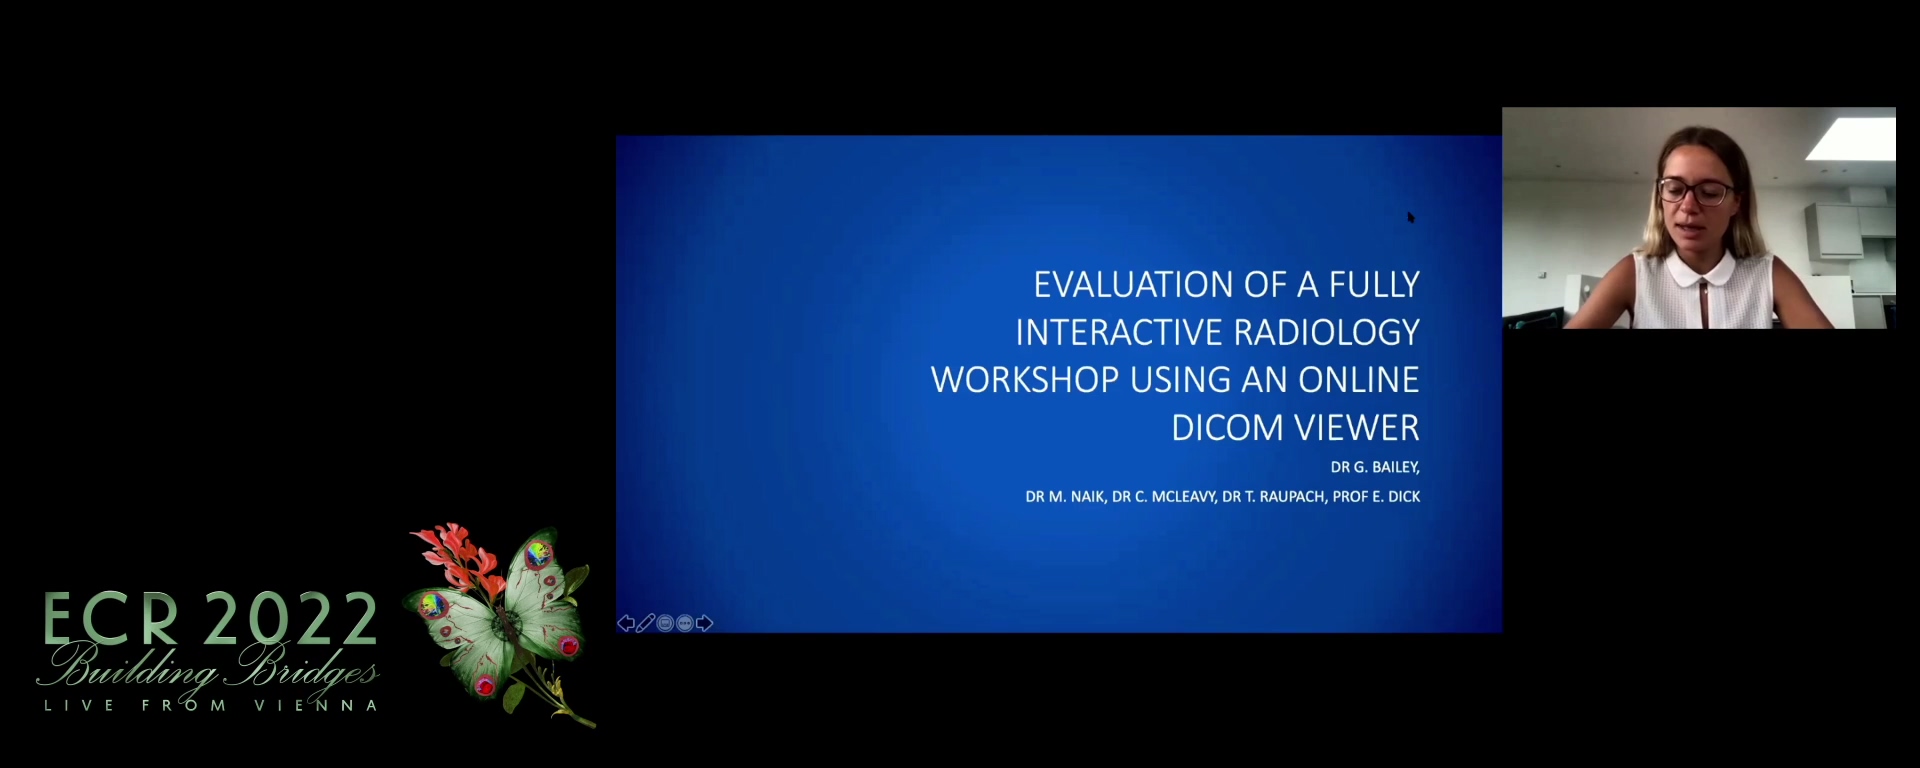 Evaluation of a fully interactive radiology workshop using an online DICOM viewer - Georgina Bailey, Surrey / UK